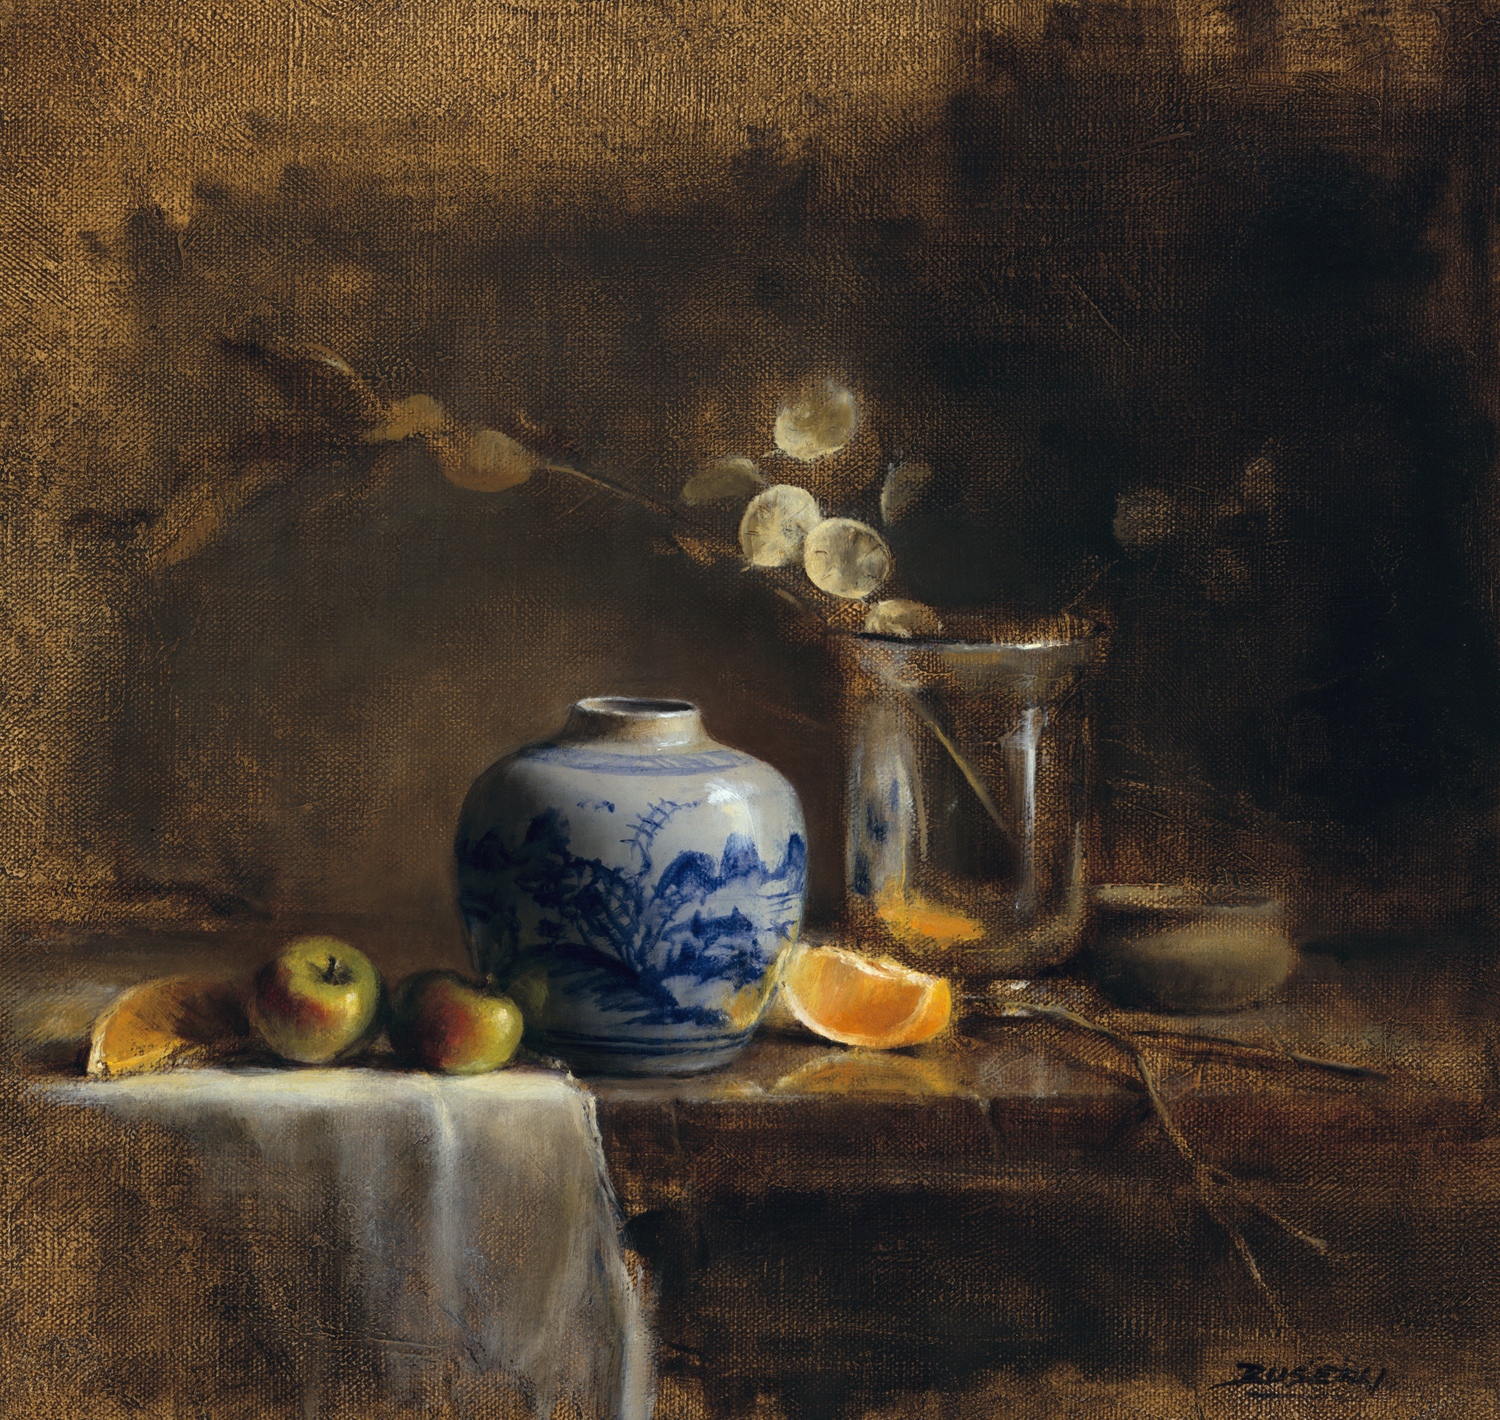   THE CHINESE JAR   oil on linen | 15" x 16" 